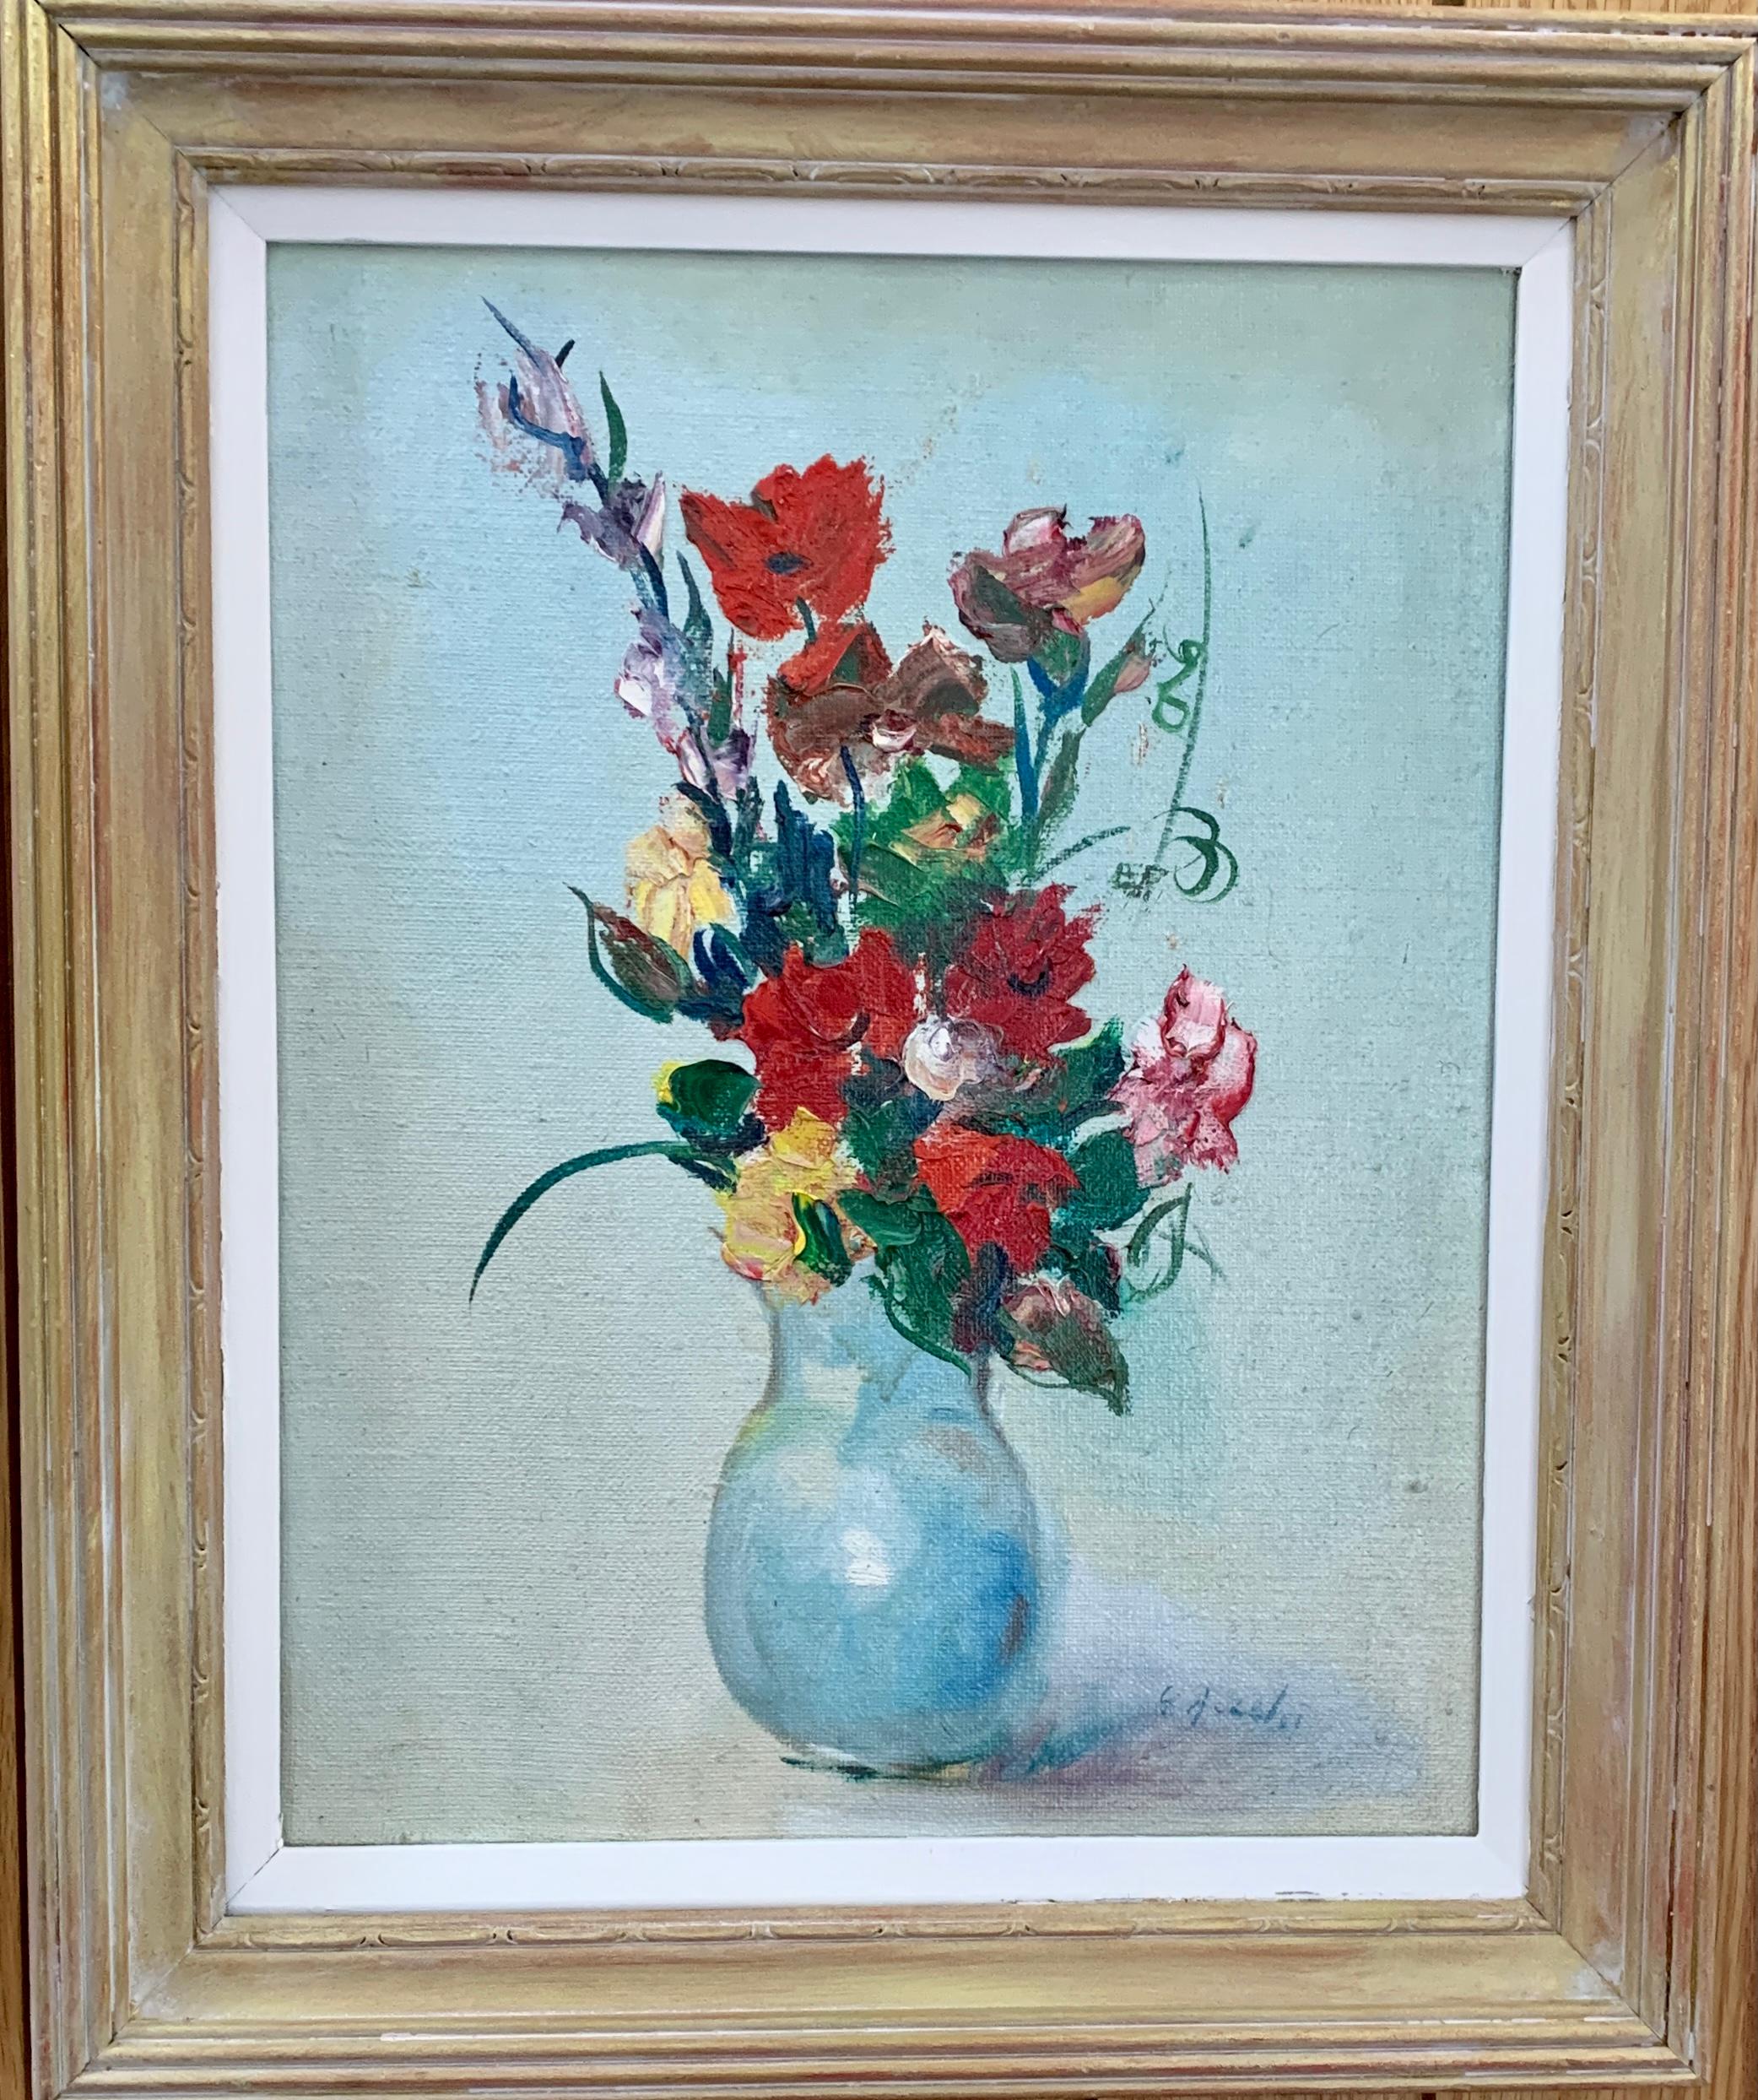 George Aczel Figurative Painting - Impressionist mid 20th century still life of flowers in a vase, with poppies